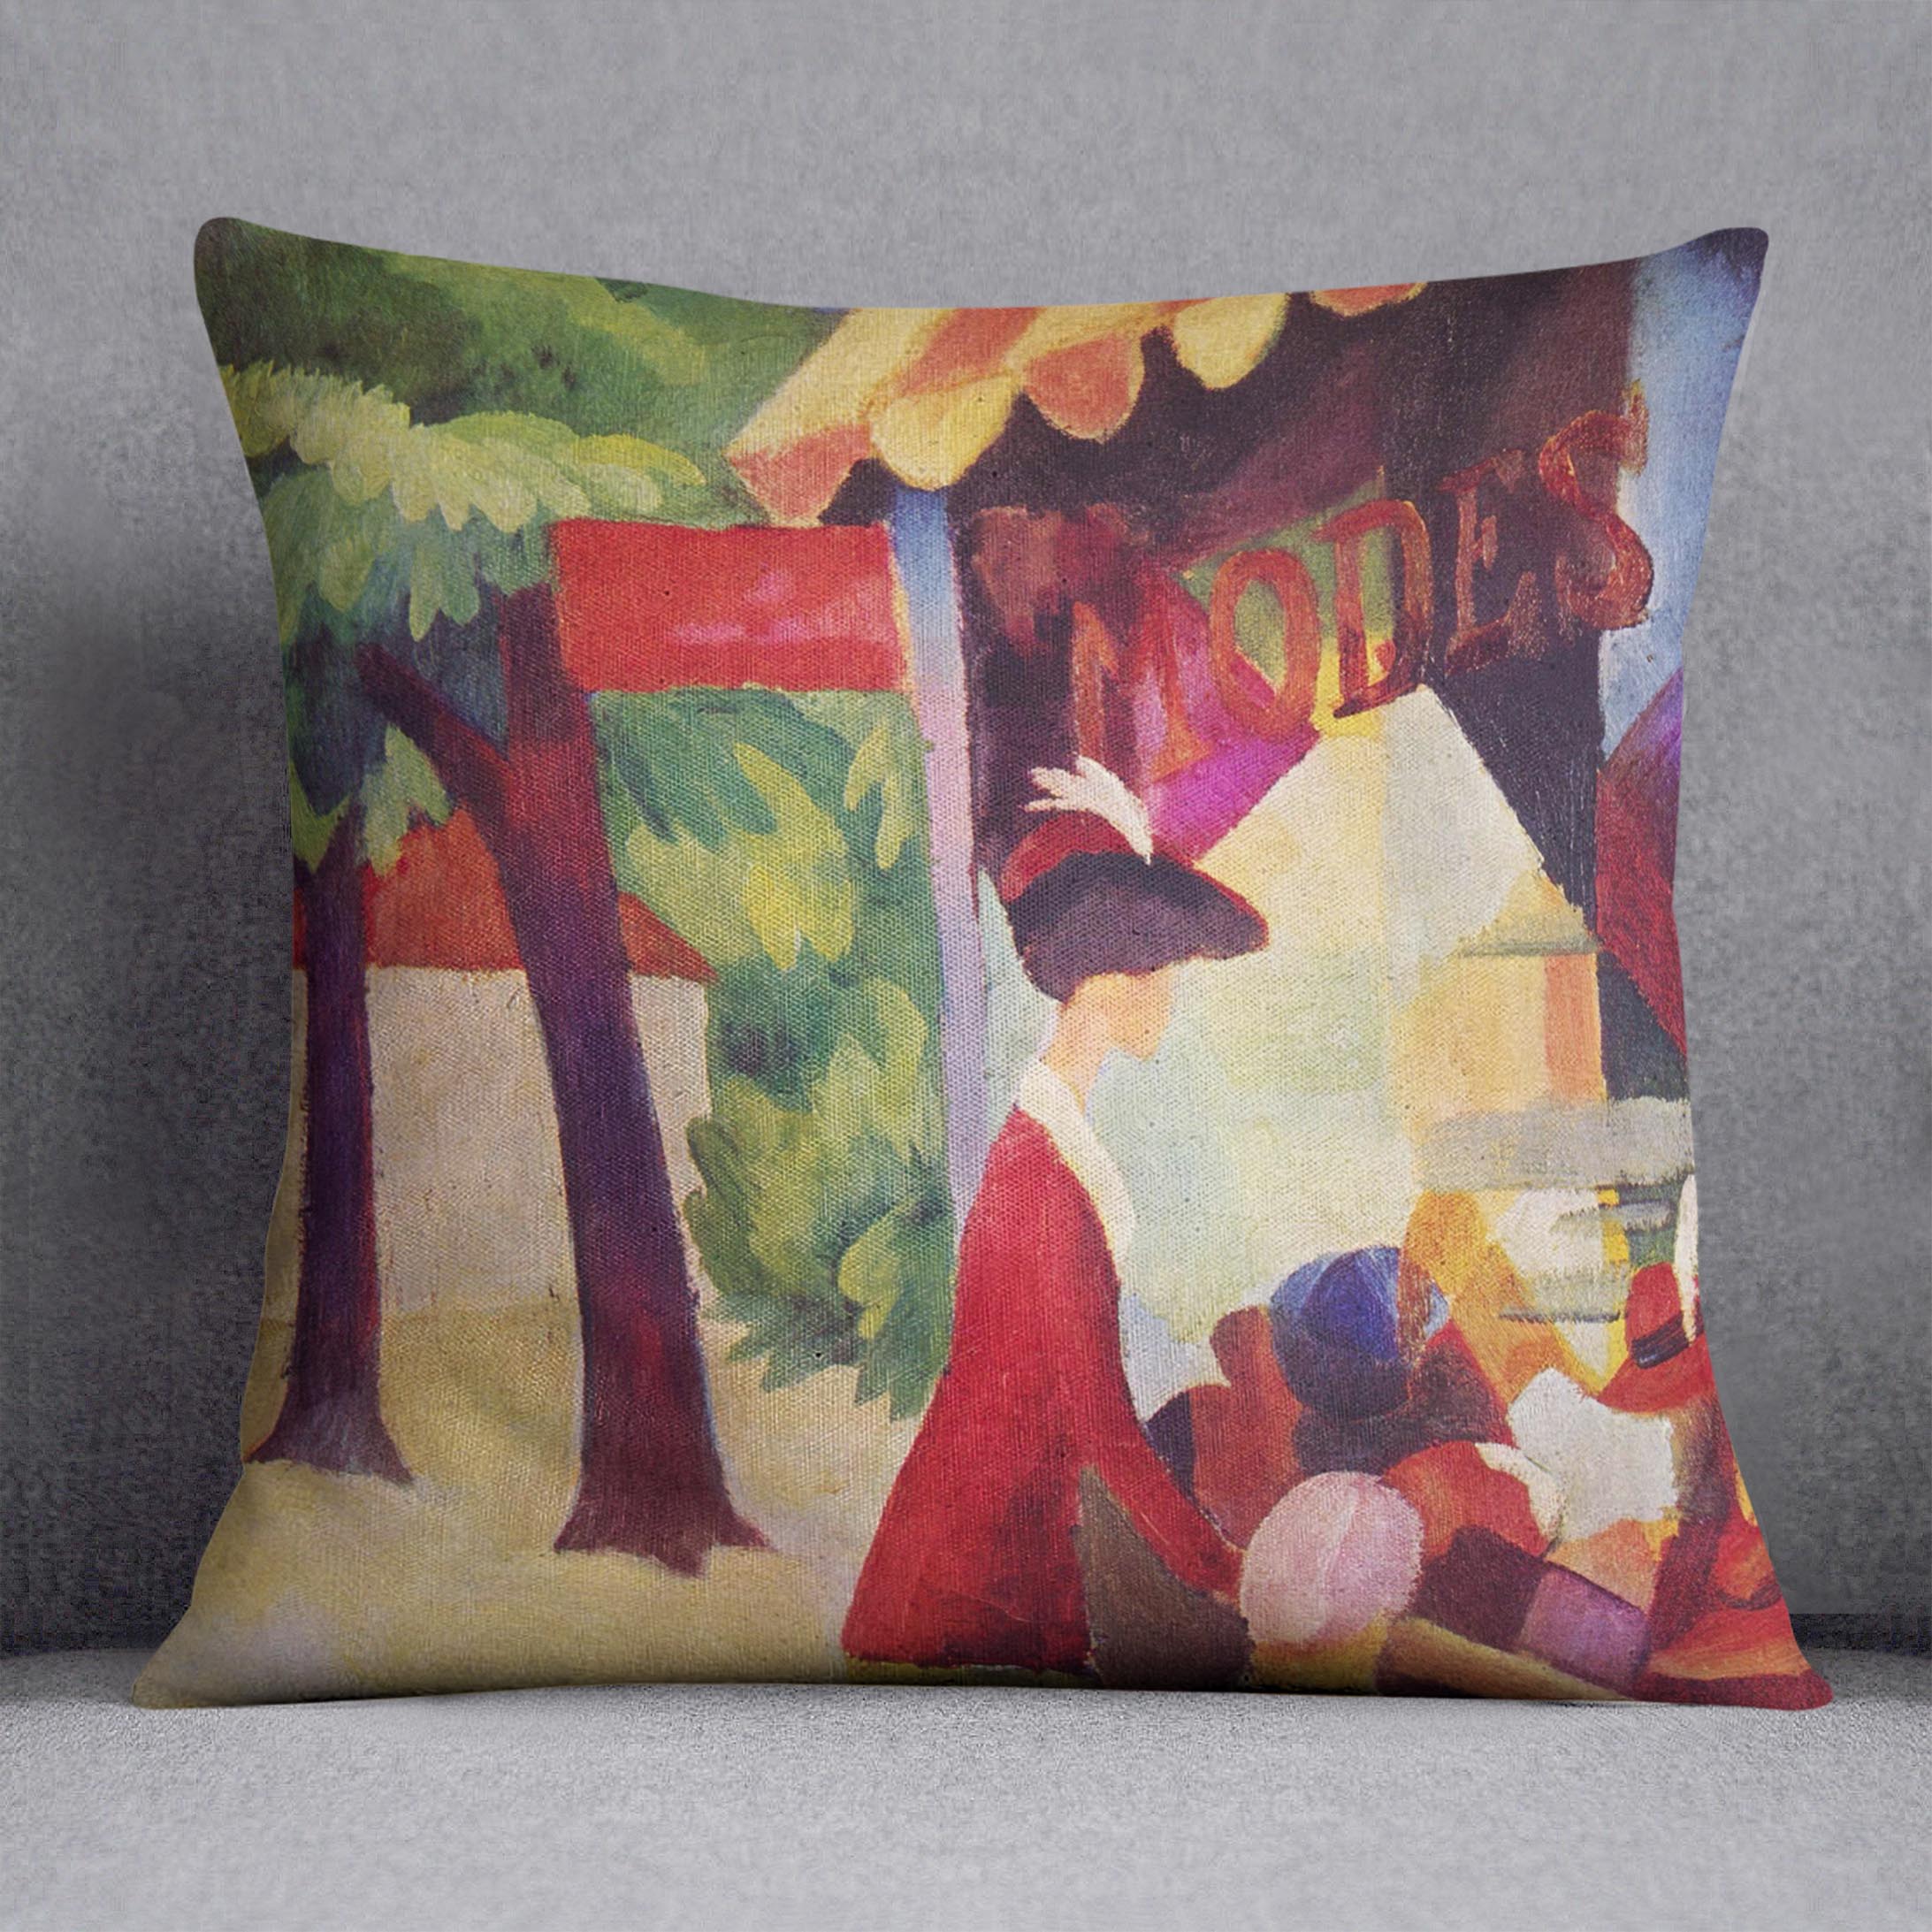 Before Hutladen woman with a red jacket and child by Macke Cushion - Canvas Art Rocks - 1